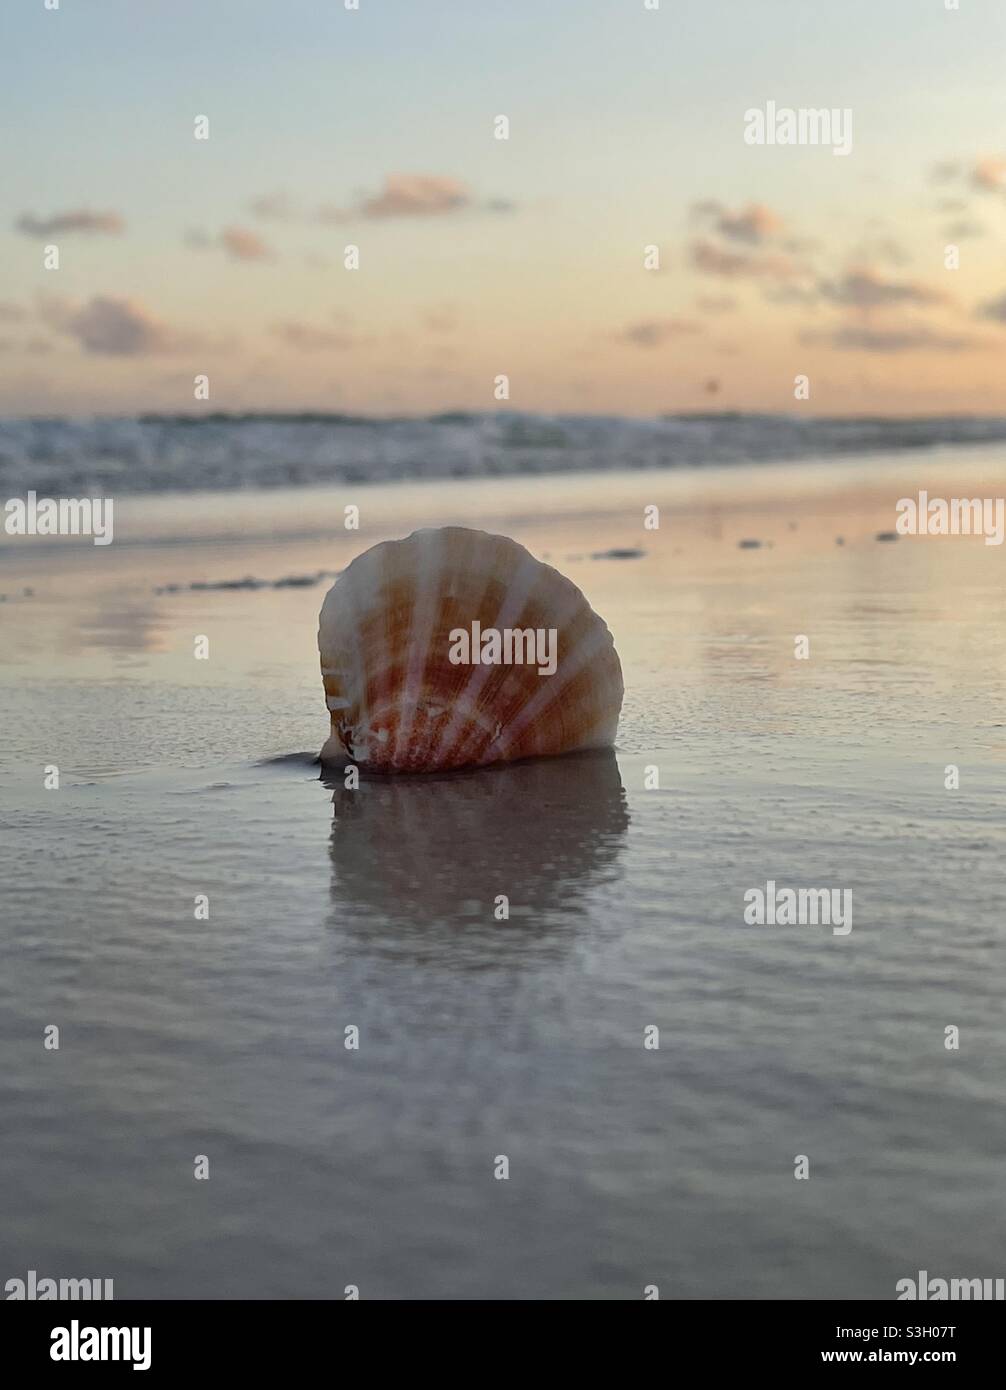 Select focus on a colorful seashell with sunset sky background Stock Photo